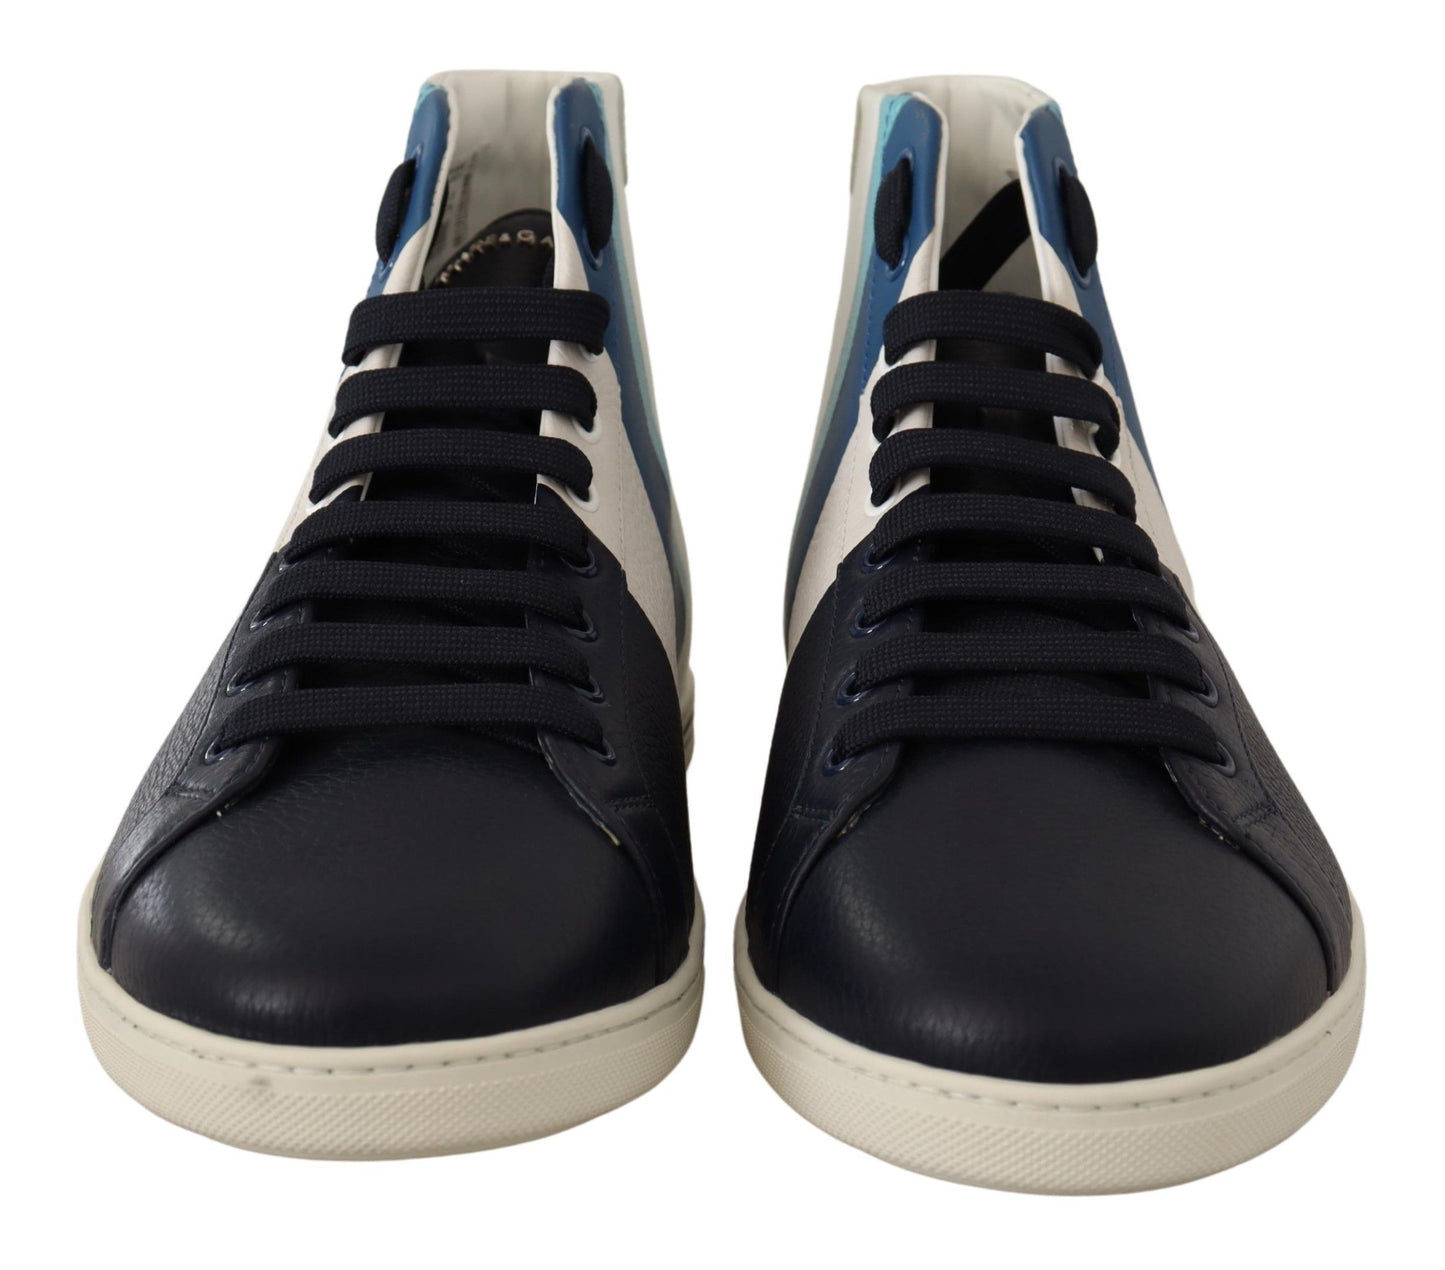 Elevate Your Style with Chic High Top Sneakers